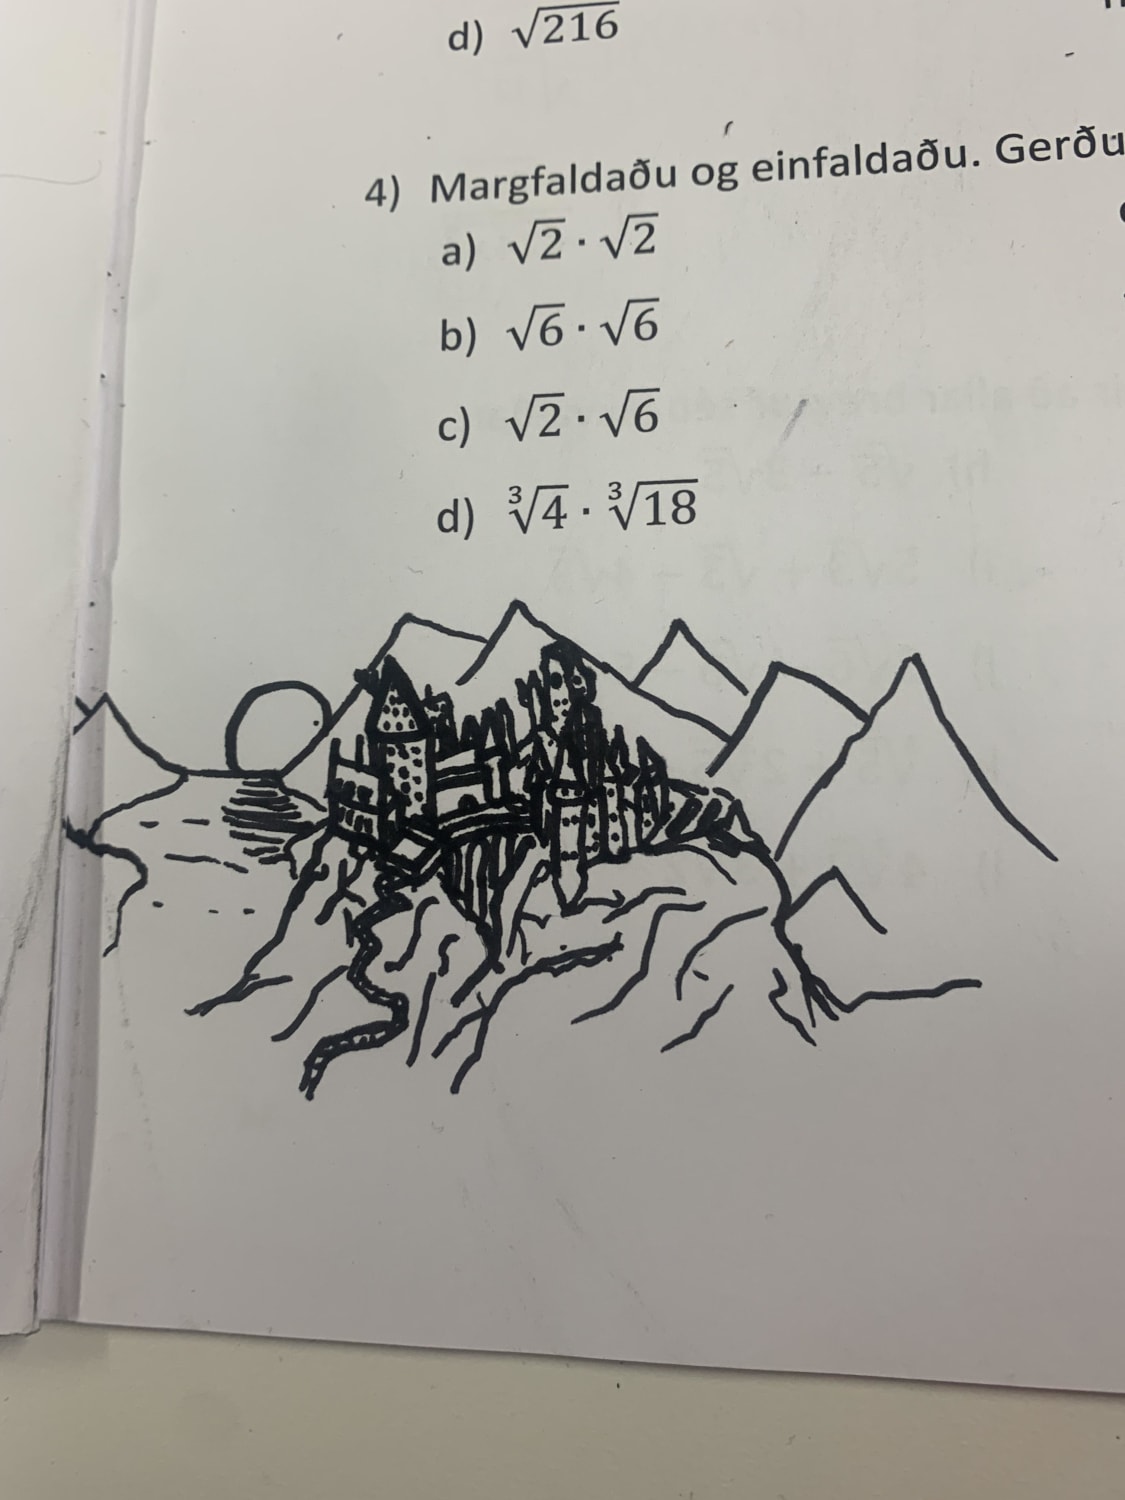 Here’s a drawing of Hogwarts on my math worksheet.